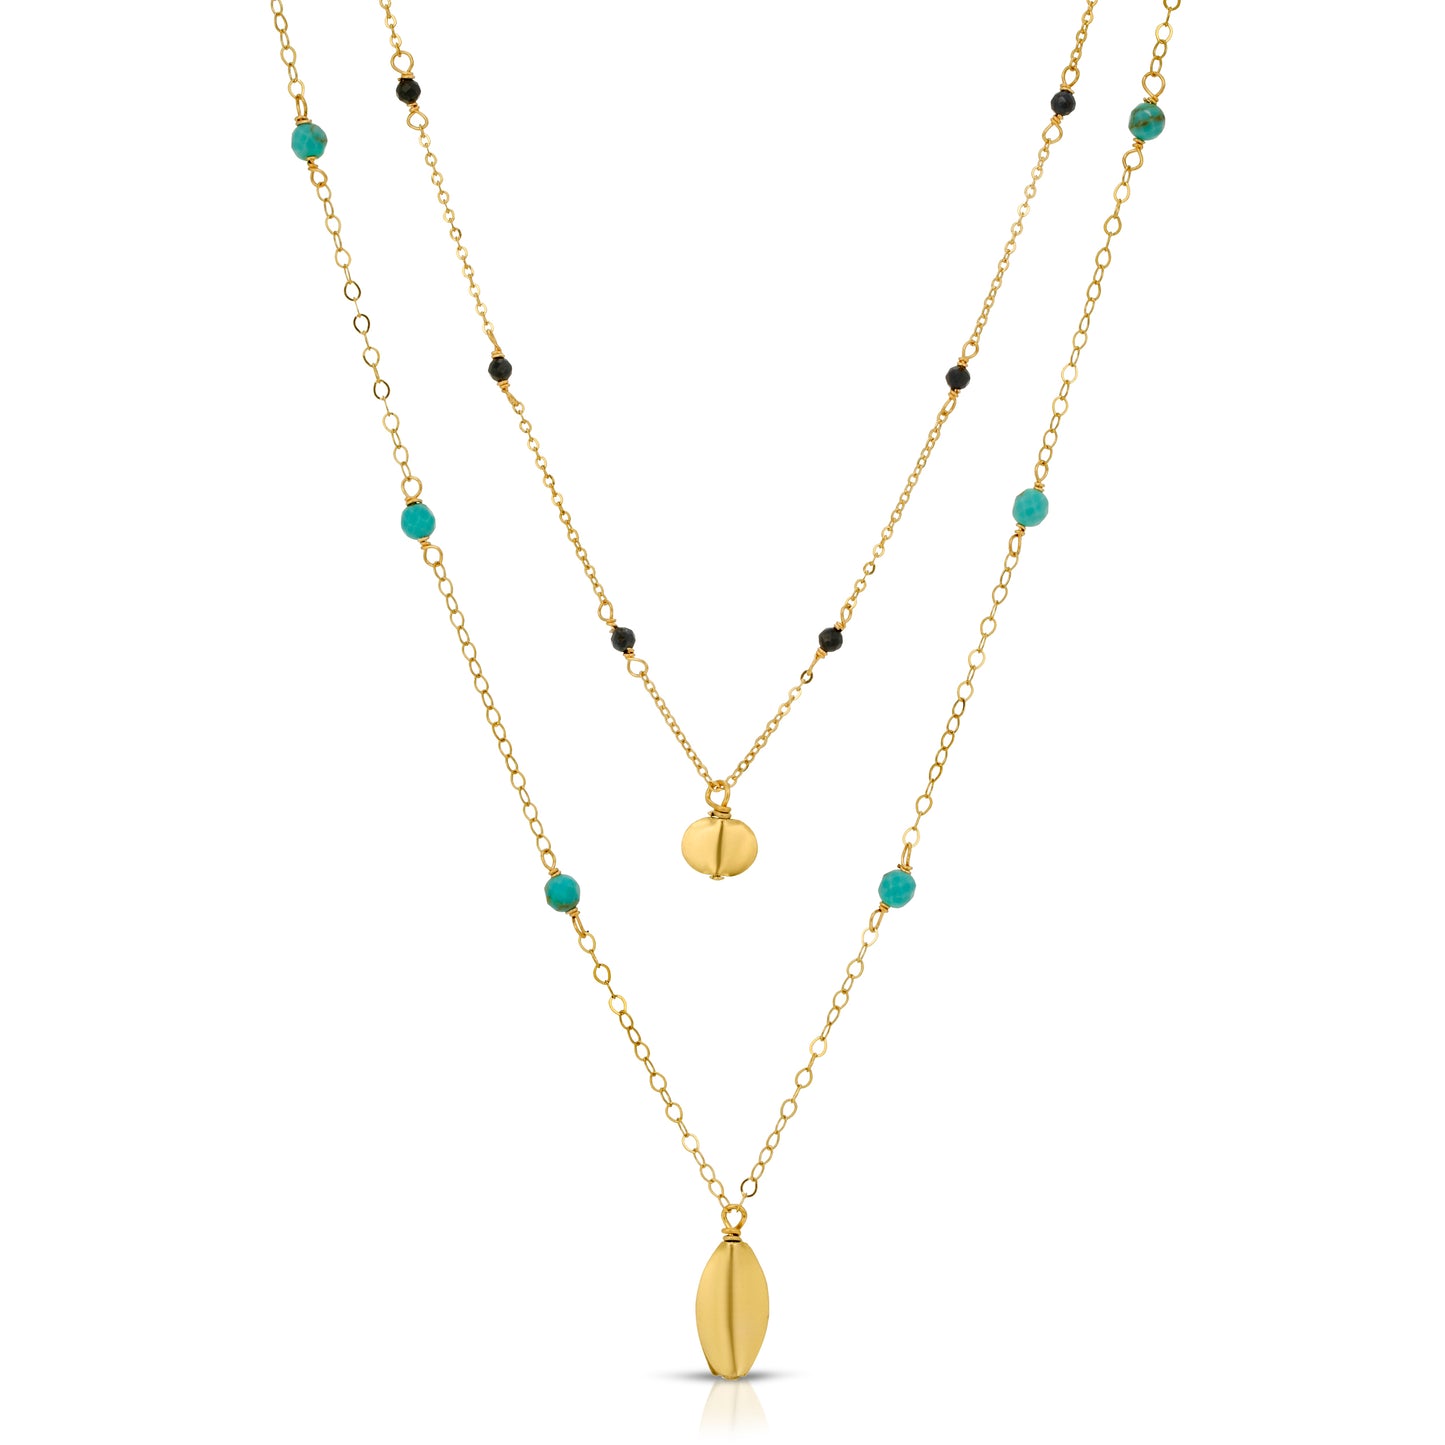 18K GOLD LEAF AND TURQUOISE NECKLACE - Danielle Morgan 